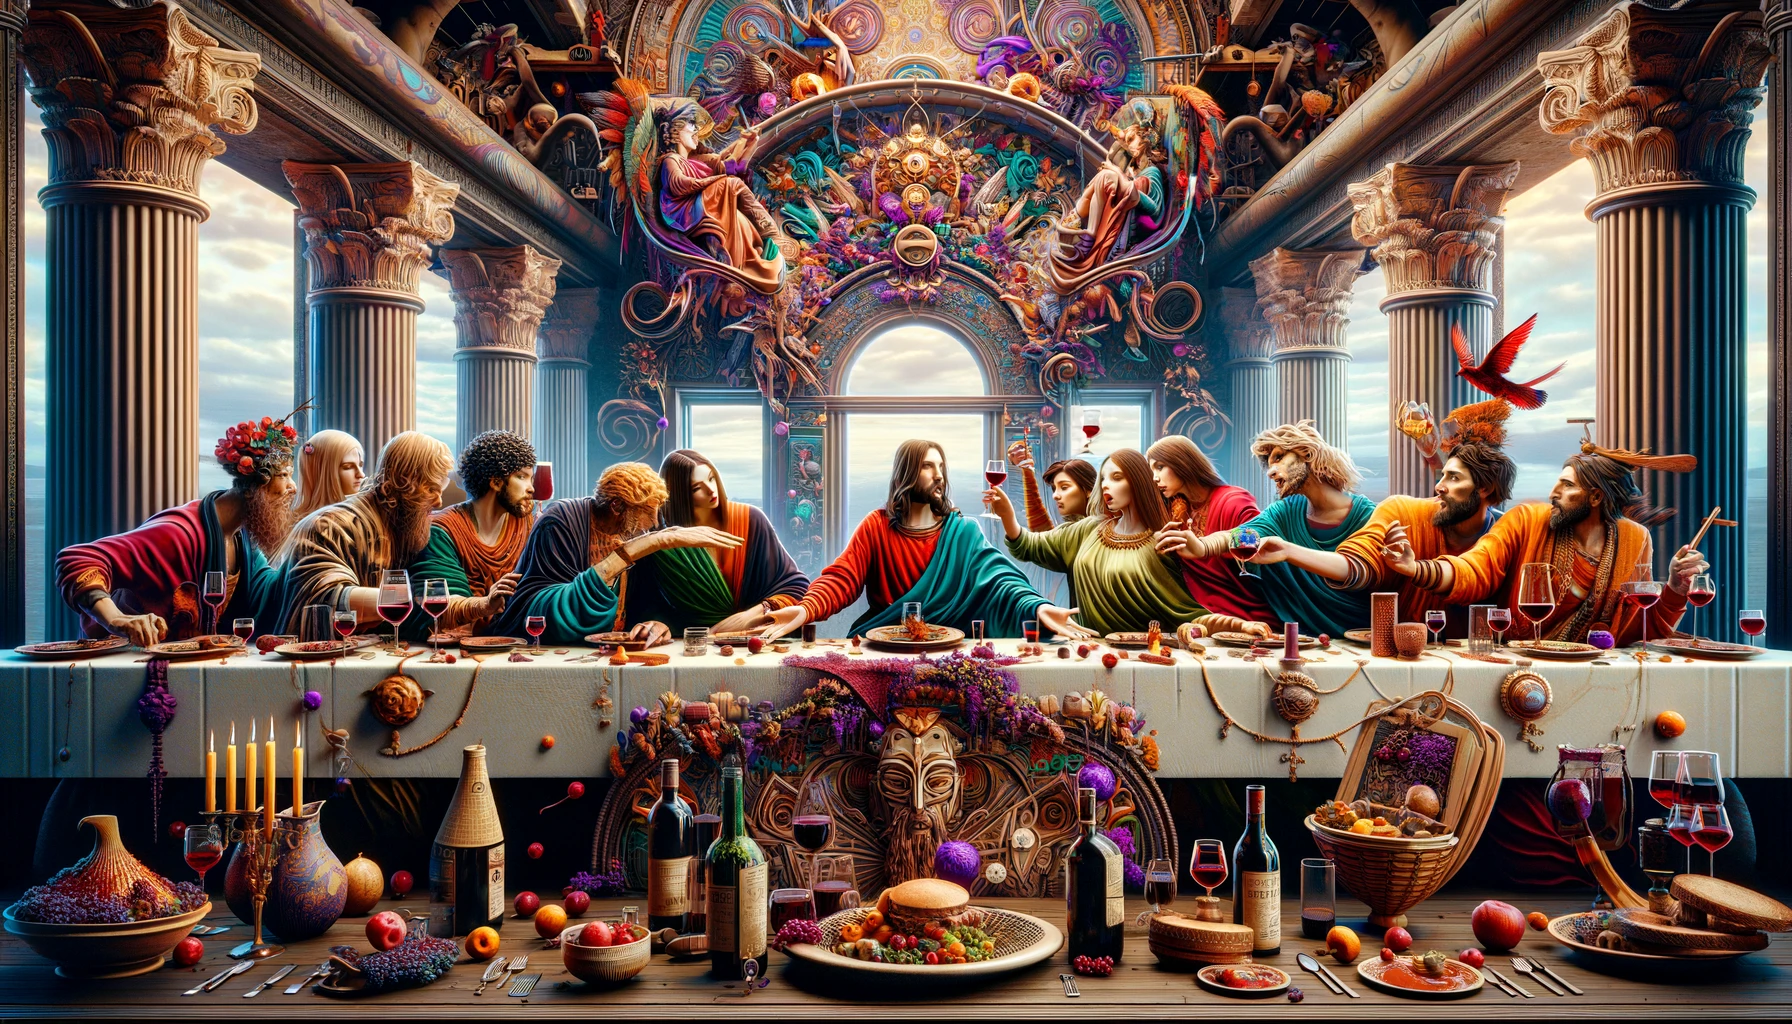 Wine as a metaphor: The Last Supper" in a 16:9 aspect ratio, focusing on a vibrant and artistic interpretation with an emphasis on the joy of red wine and extravagant table settings. The characters will be styled in a dynamic, detailed, and intense artistic manner, inspired by various artistic influences but not directly referencing any specific artists. The background will be imaginative, featuring intricate designs and a biophilic style. This scene will be depicted in an ultra-realistic, high-resolution 4K style.